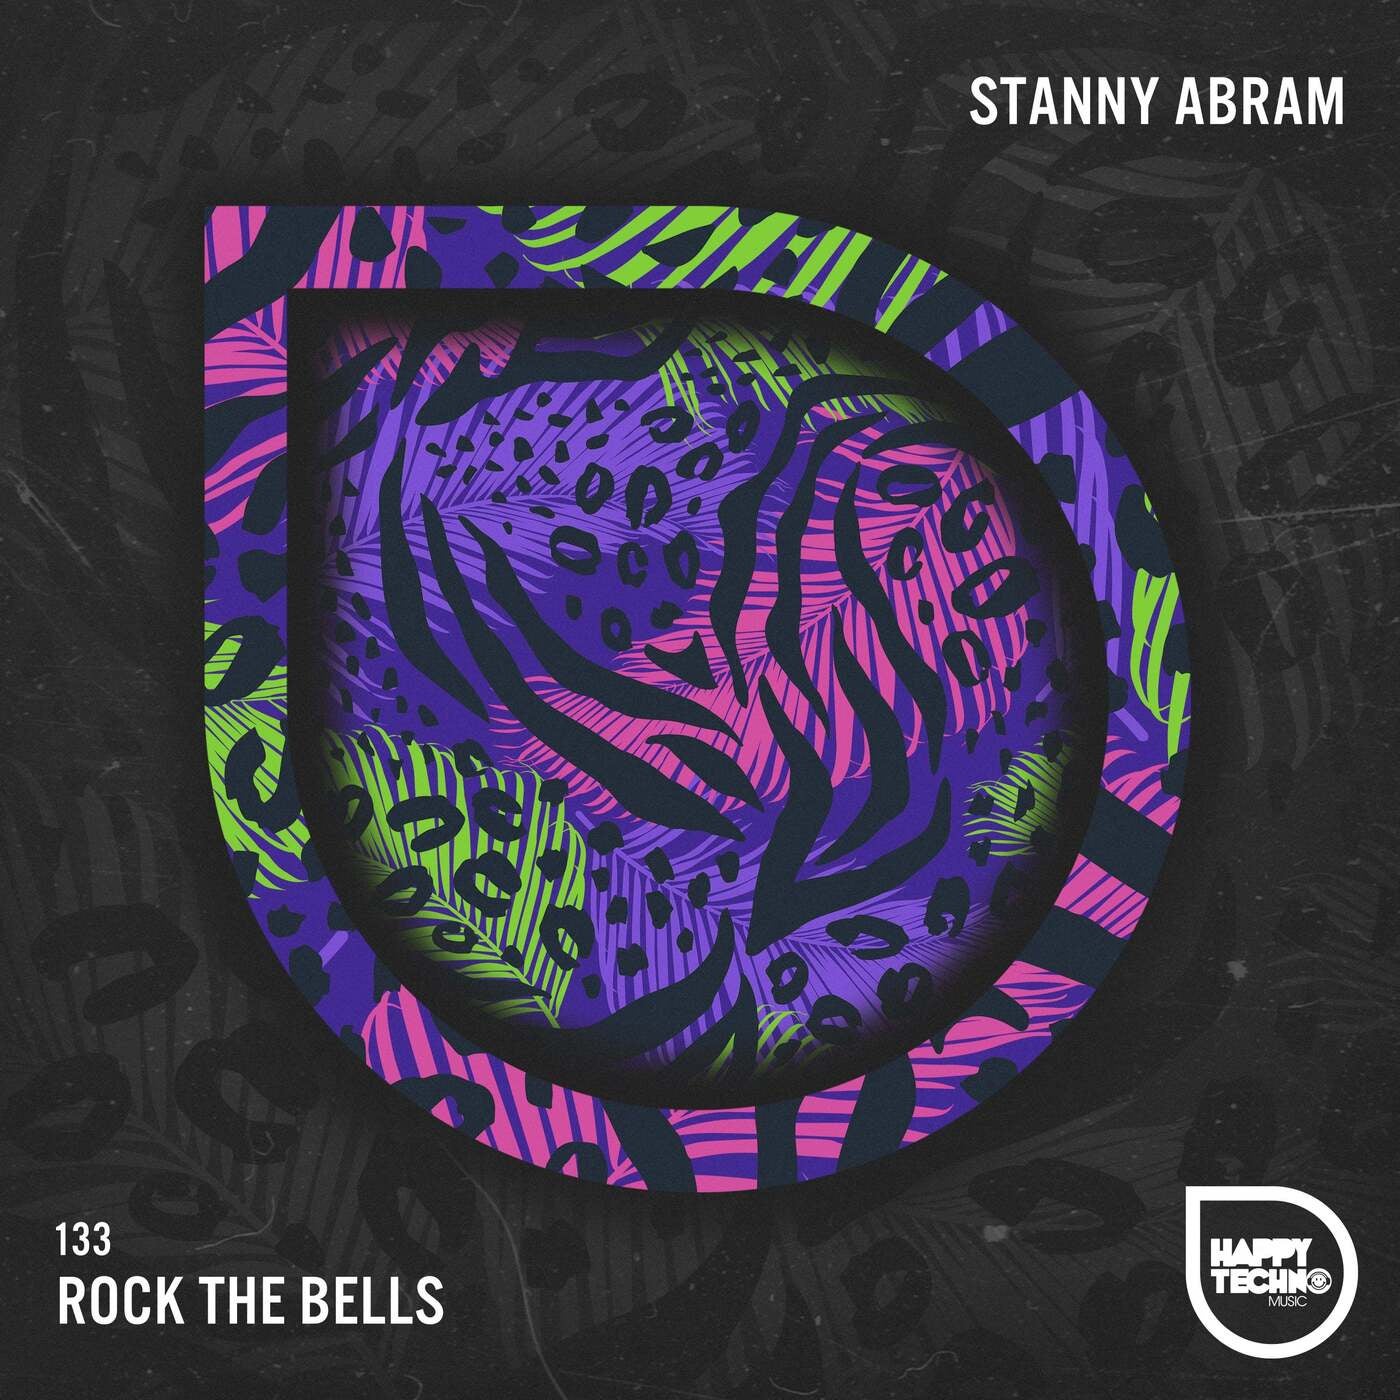 image cover: Stanny Abram - Rock the Bells / HTM133